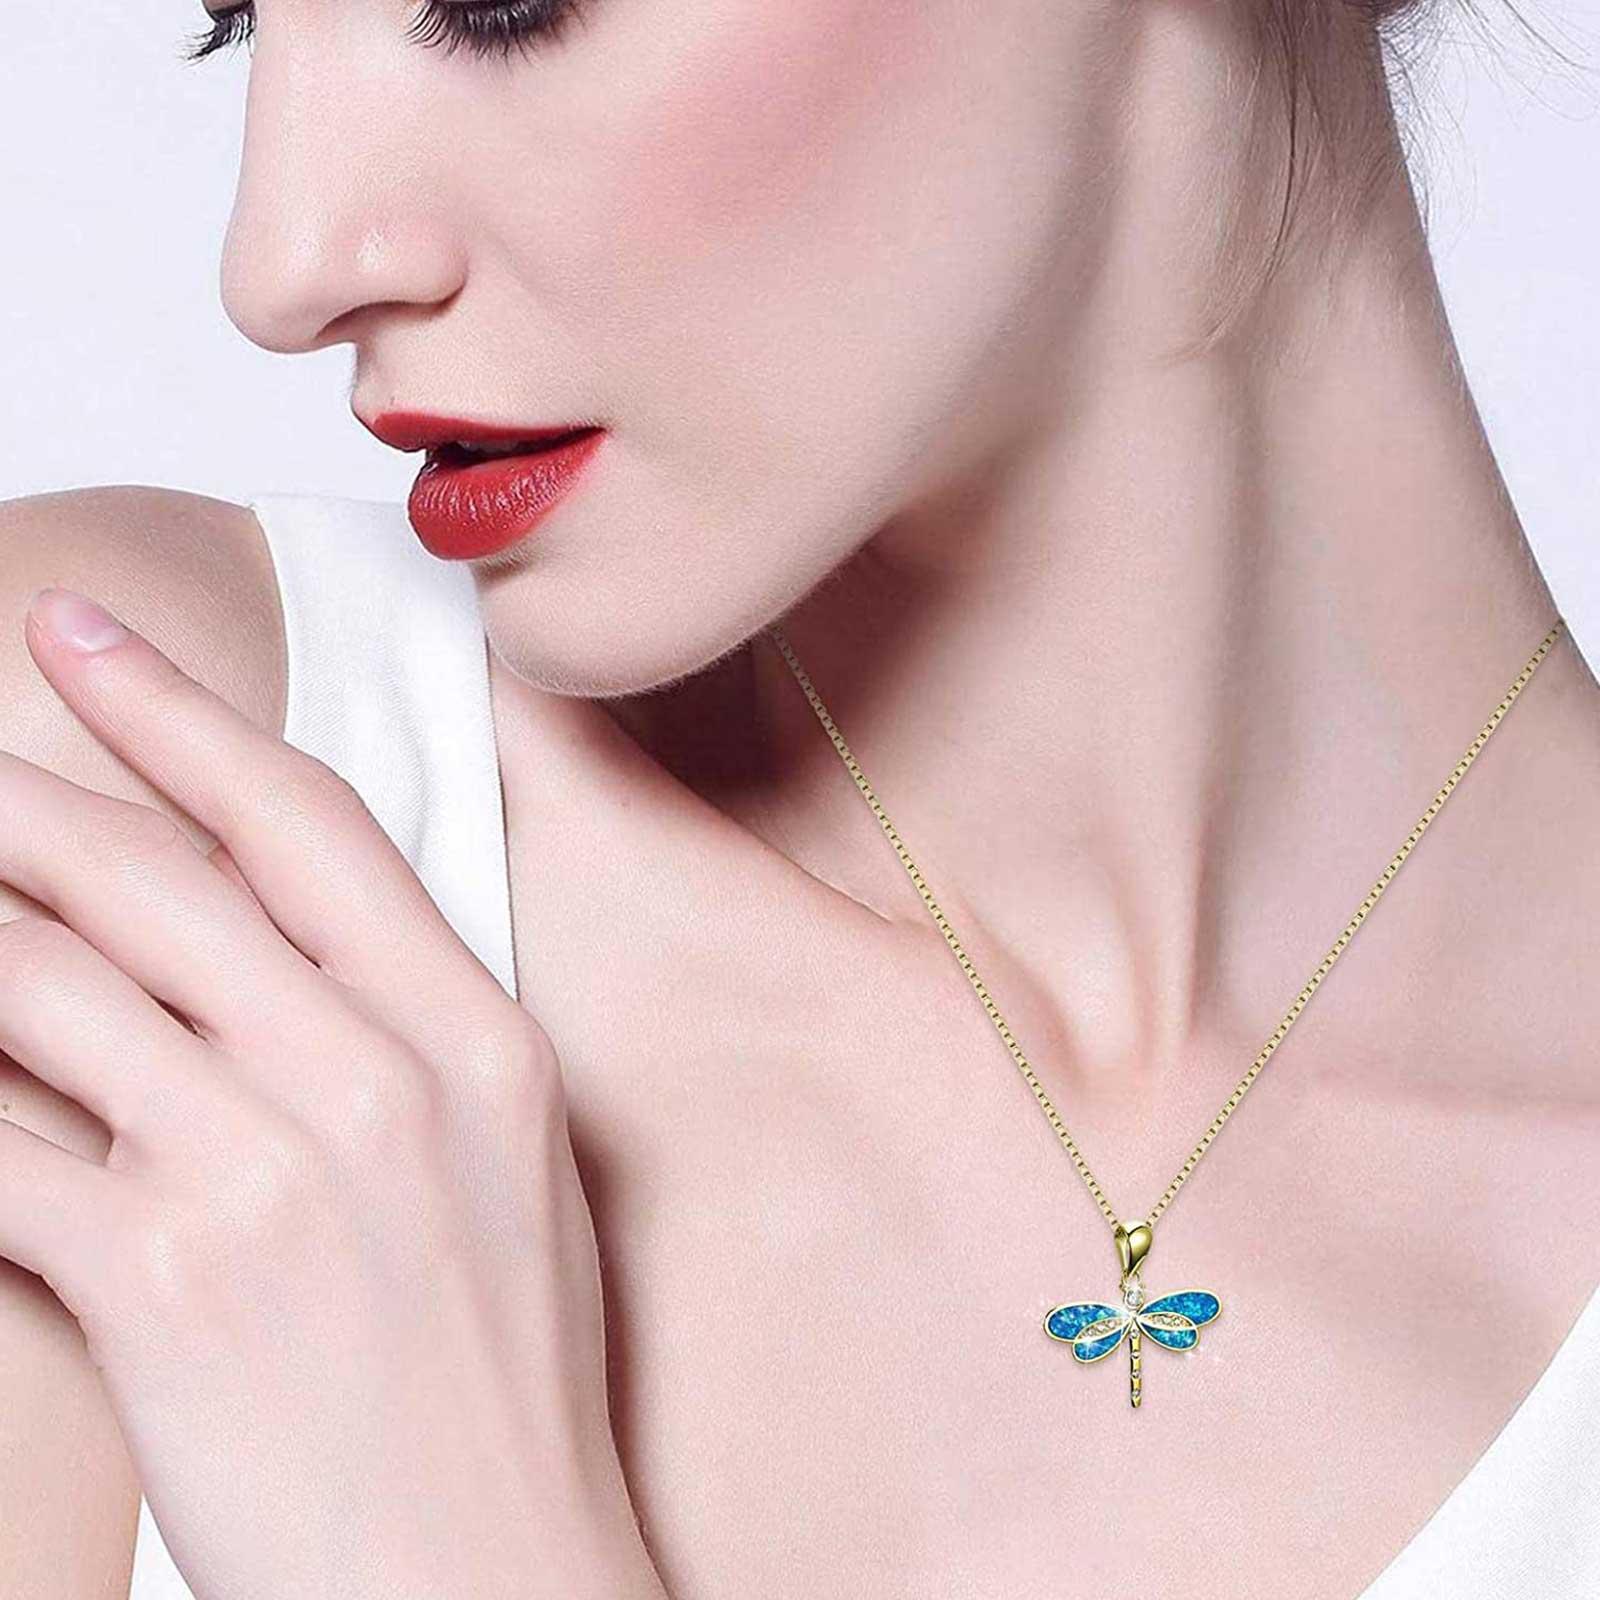 Dragonfly Necklace Pendant Choker For Women Girls Gold Silver White Blue Opal Z0T2 - image 5 of 9